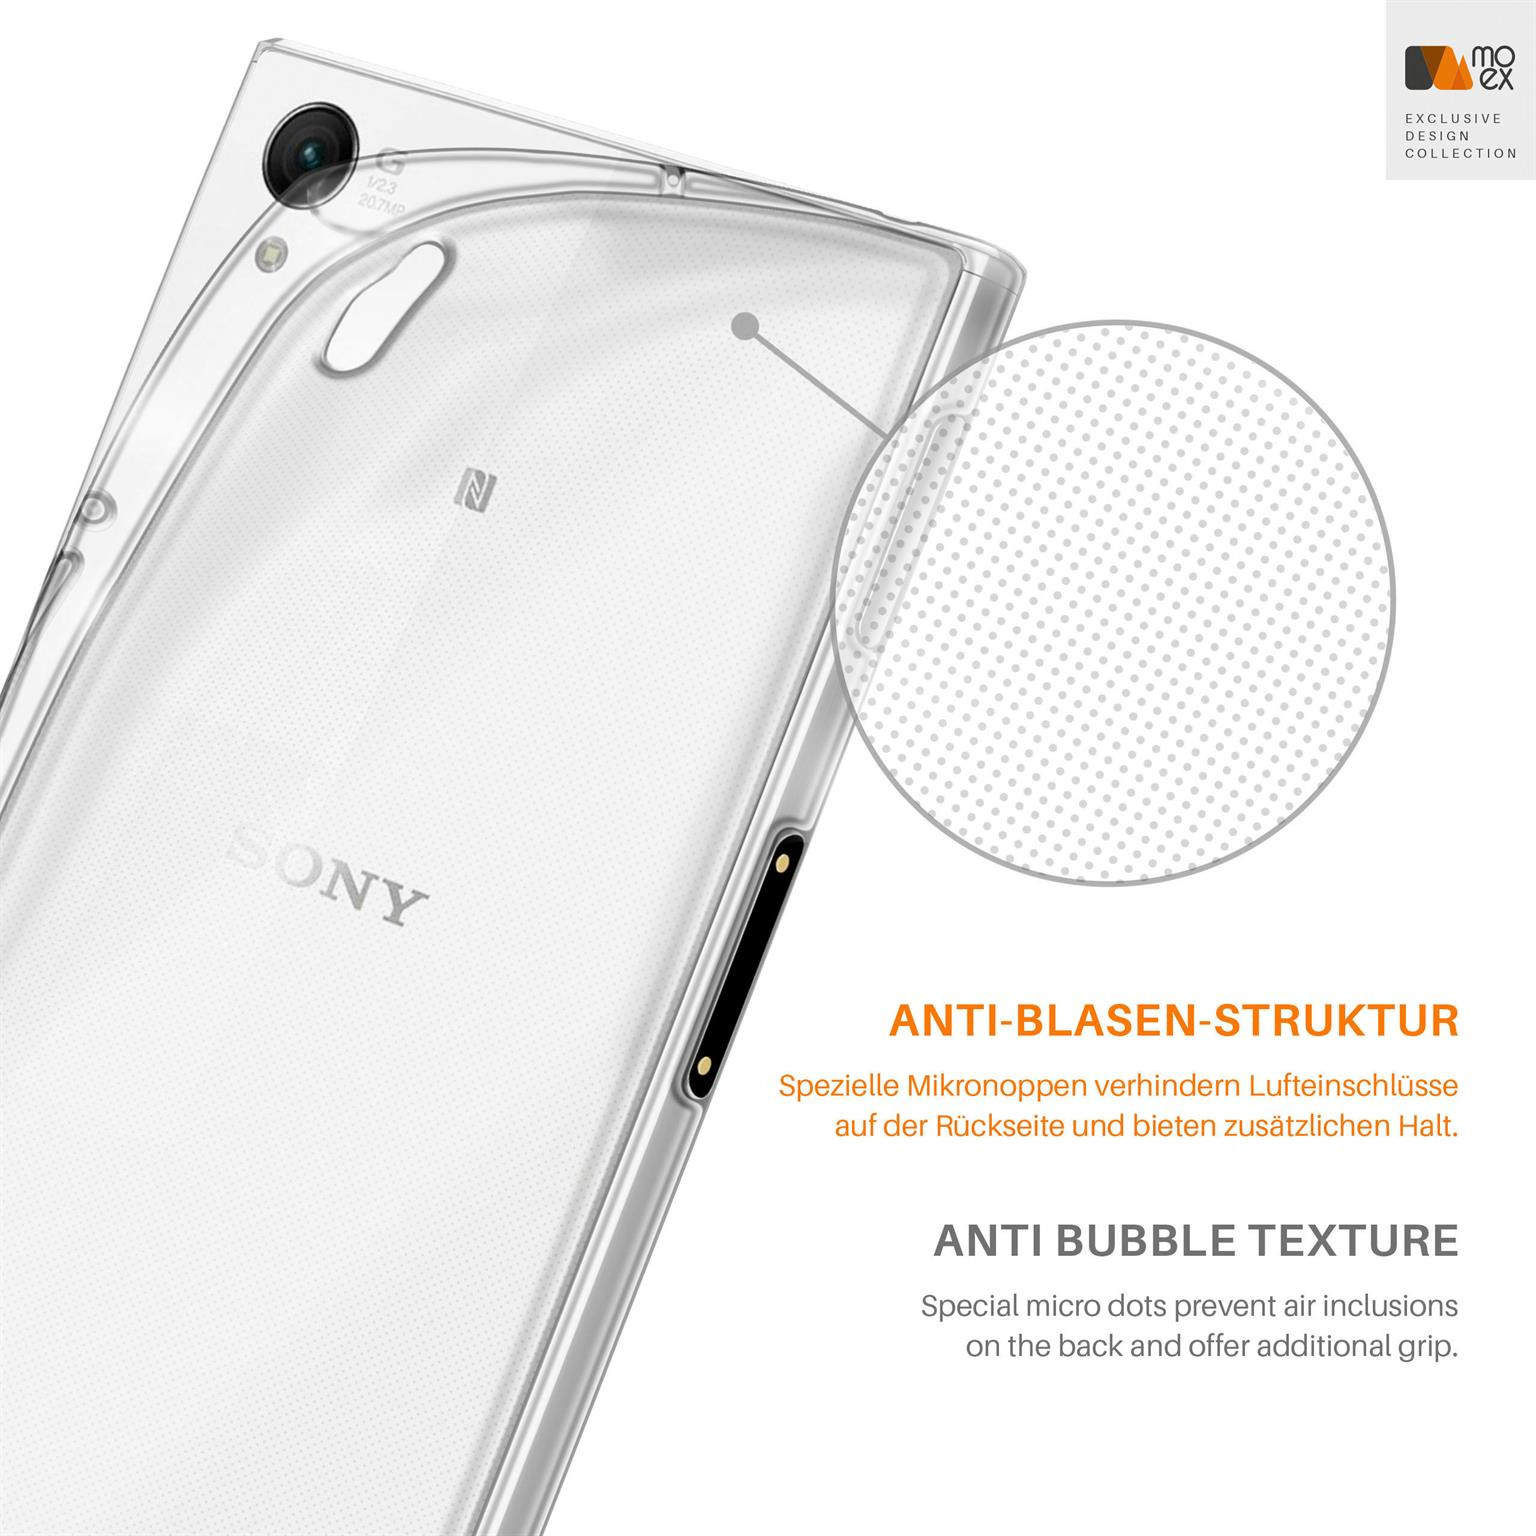 Z2, Backcover, Sony, MOEX Crystal-Clear Xperia Case, Aero